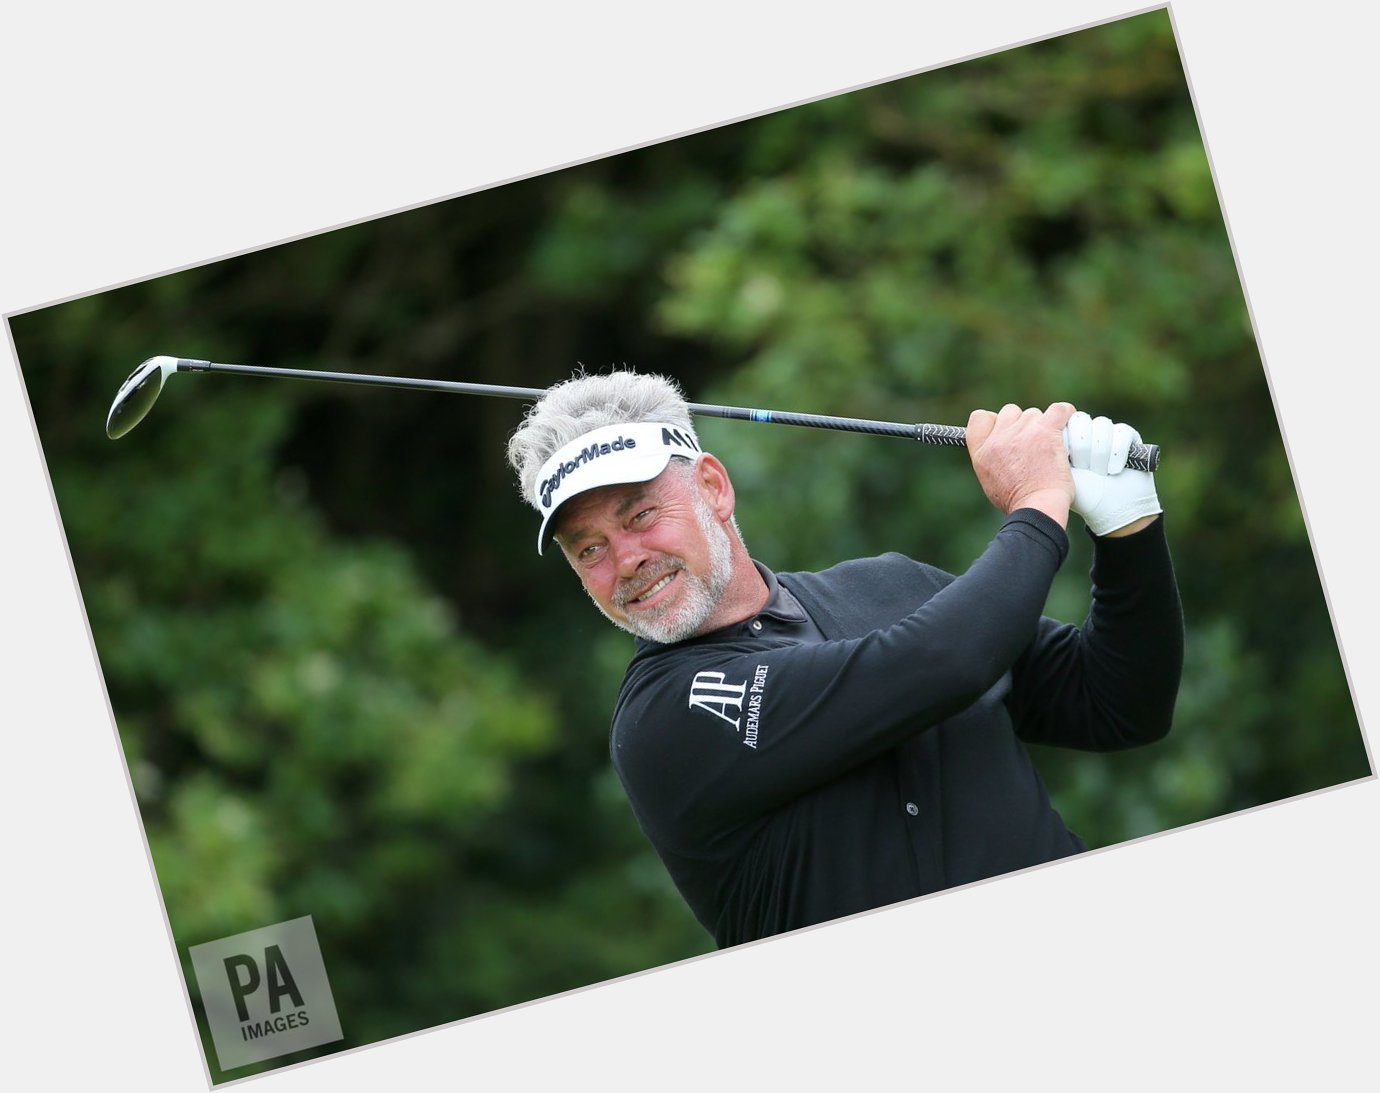 Happy birthday to former Open champion and Ryder Cup captain Darren Clarke, who turns 49 today. 